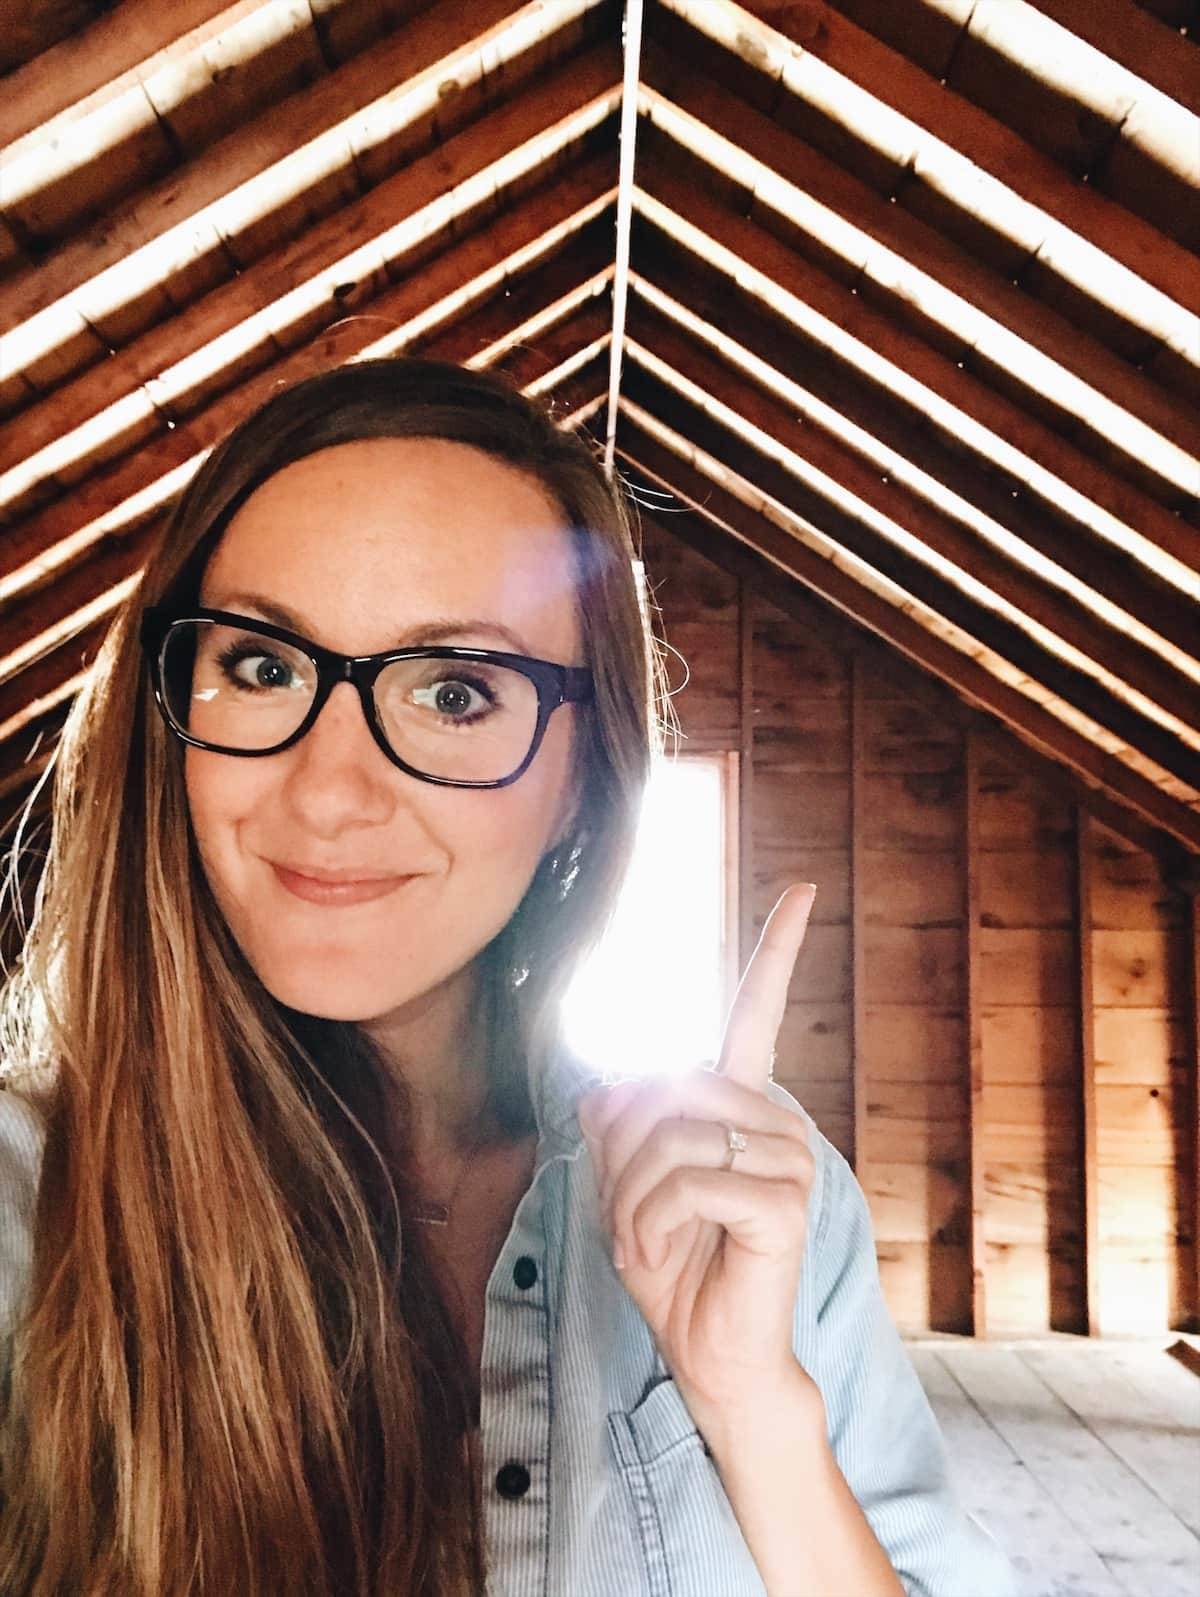 A young woman wearing large eyeglasses points to an arched ceiling with exposed wood.